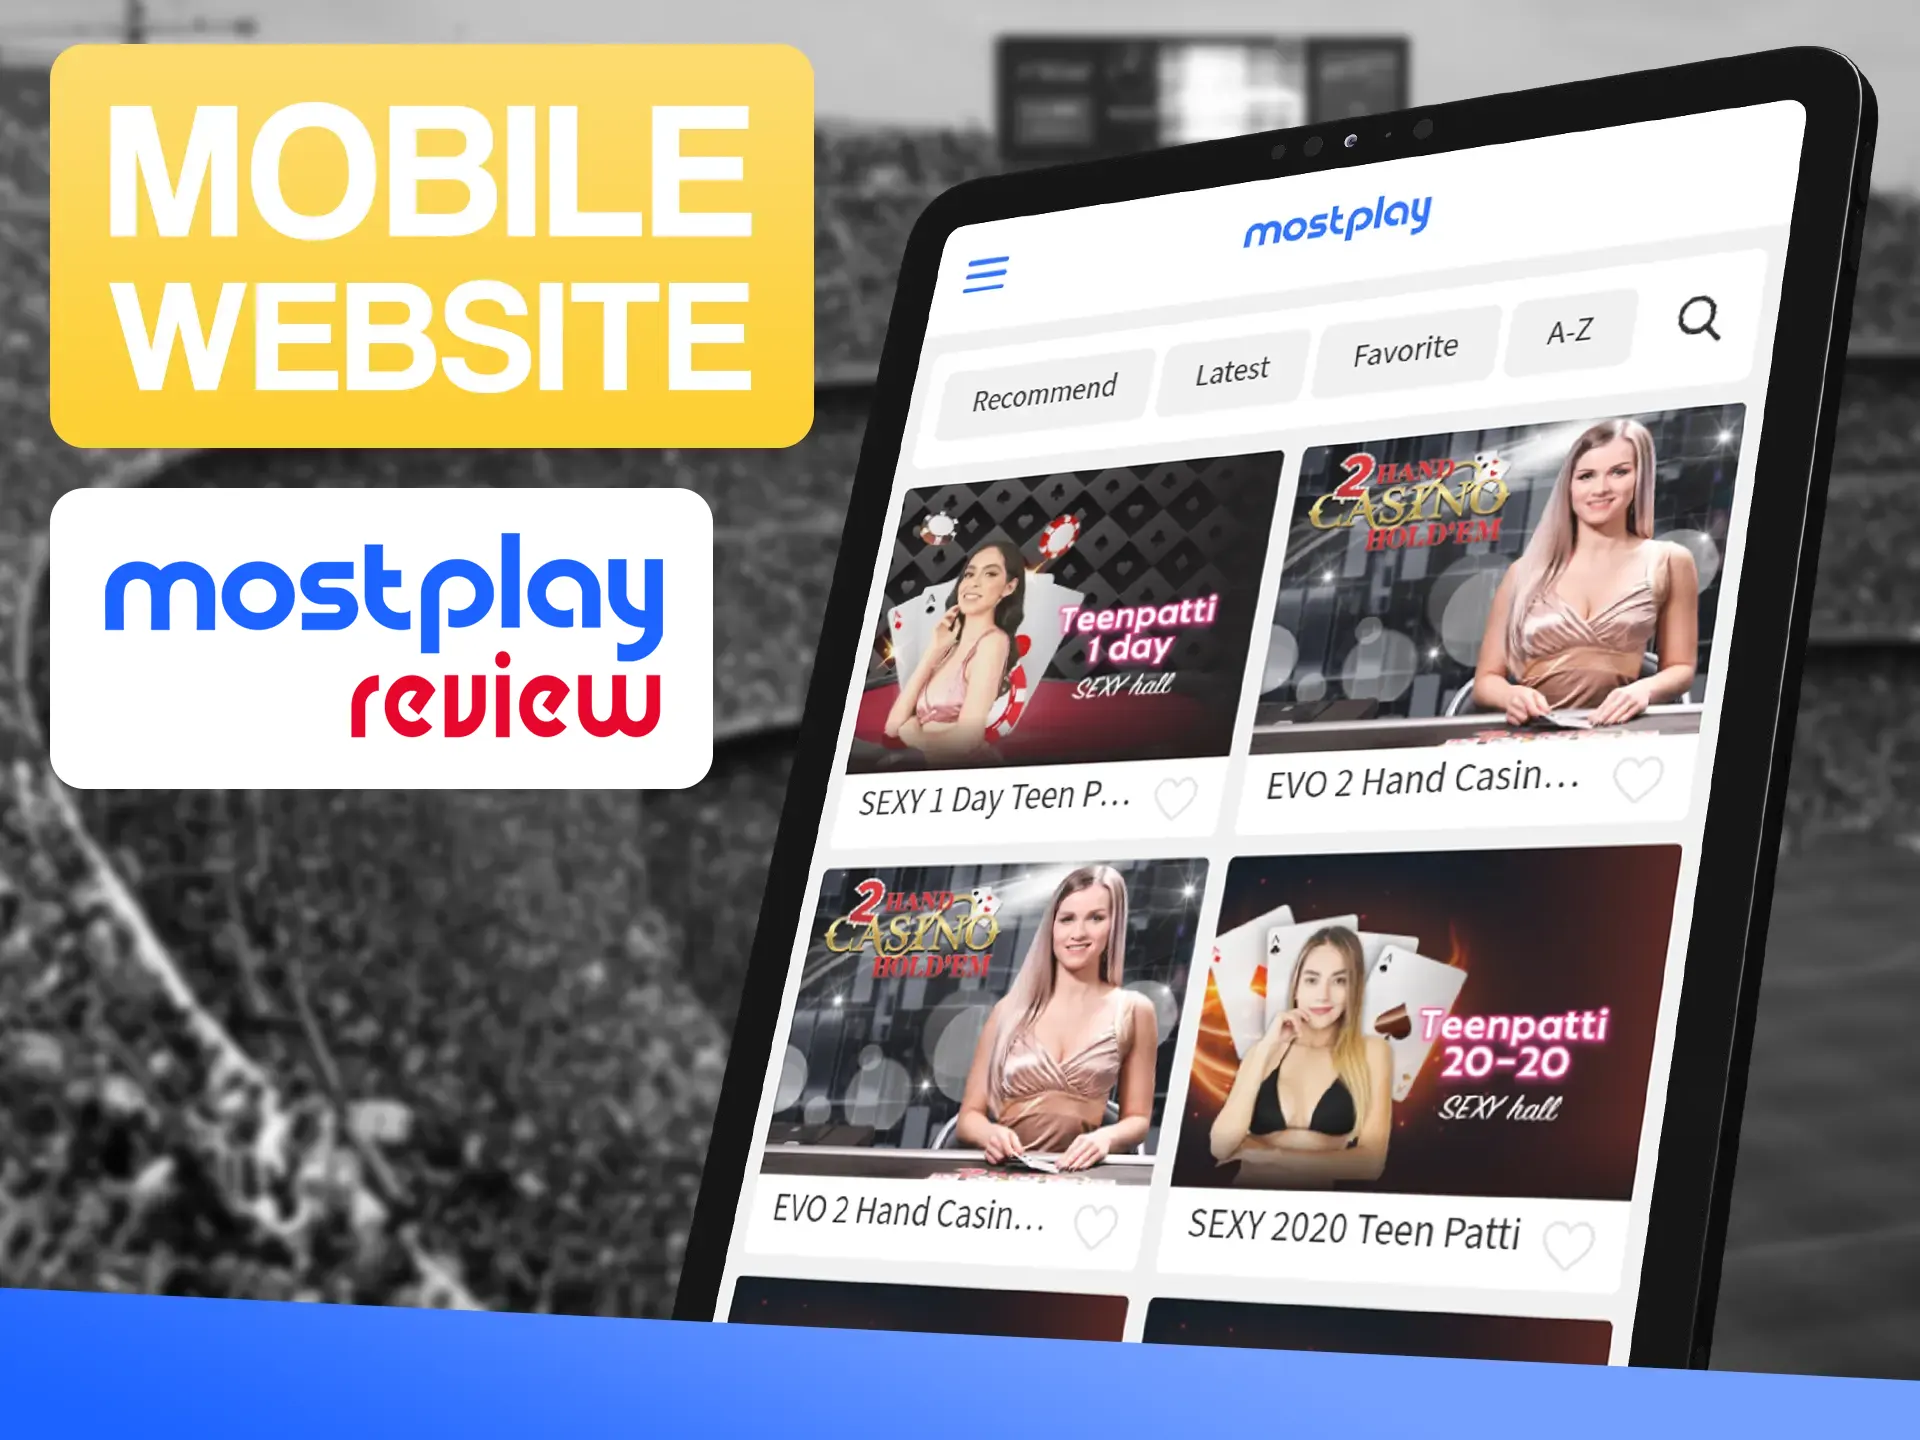 You can use the mobile version of the Mostplay website on any mobile device.